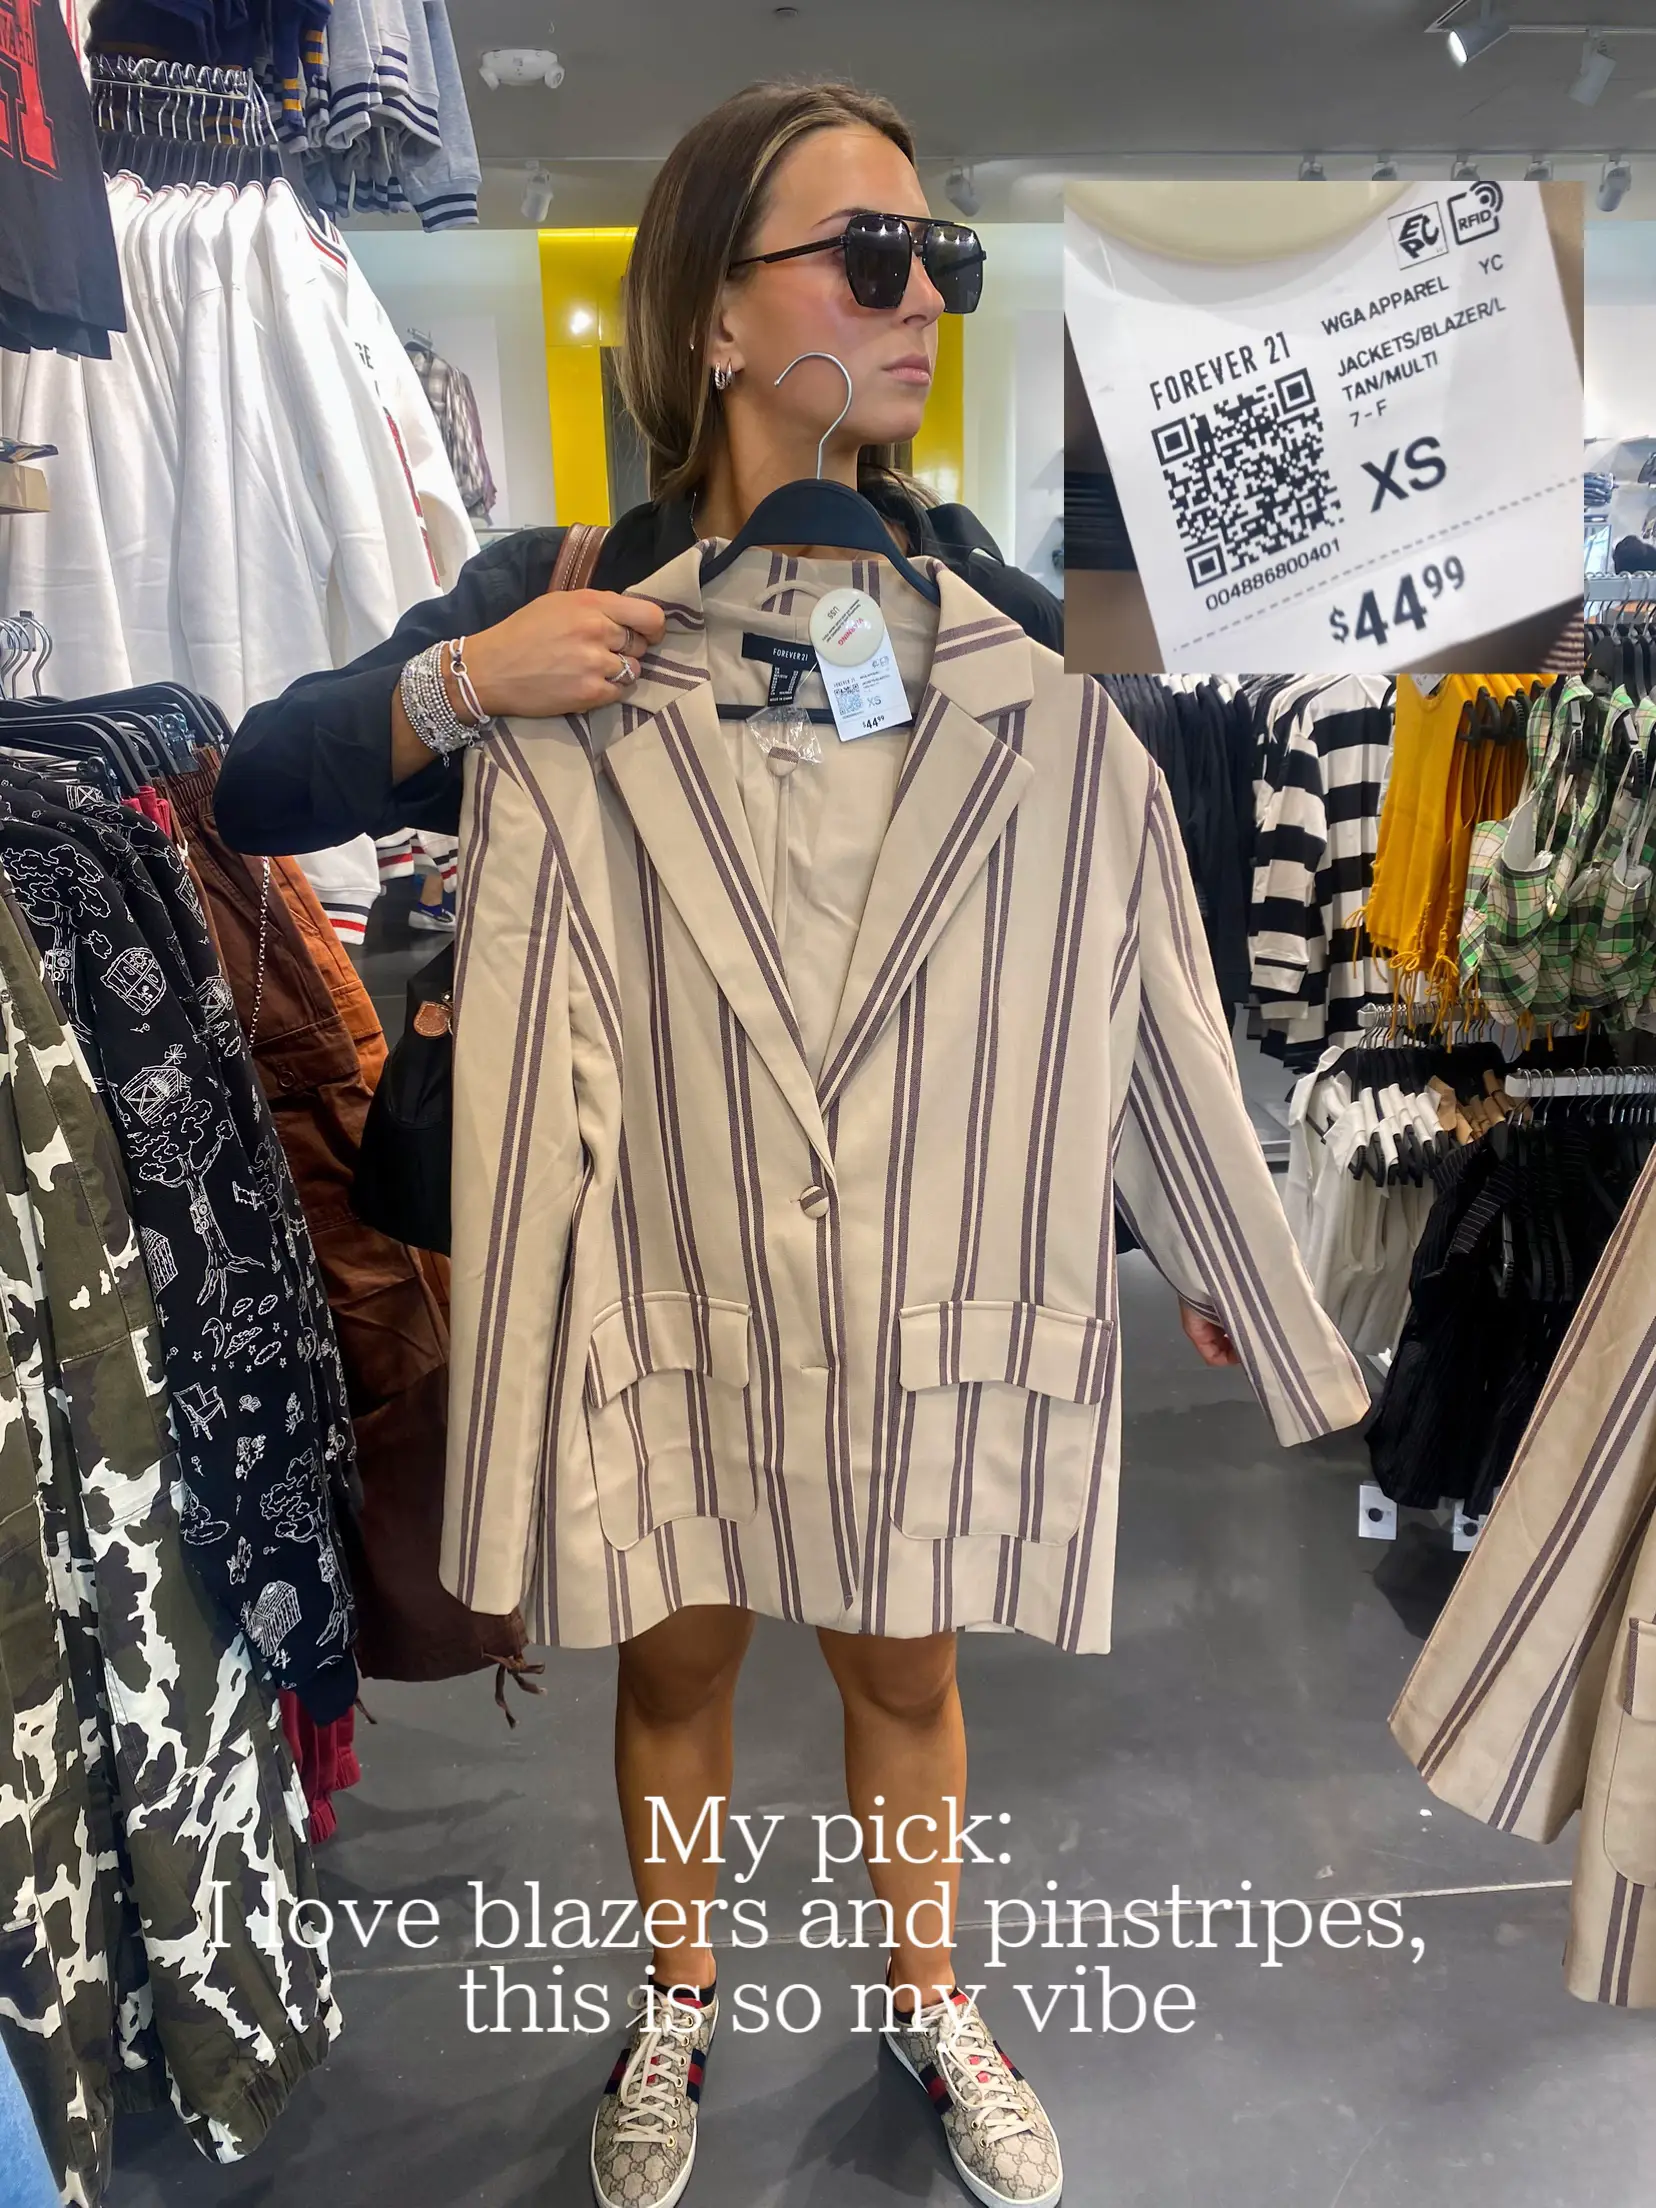 Forever 21 Times Square Flagship Store Review & Haul - The Glamorous Gleam %